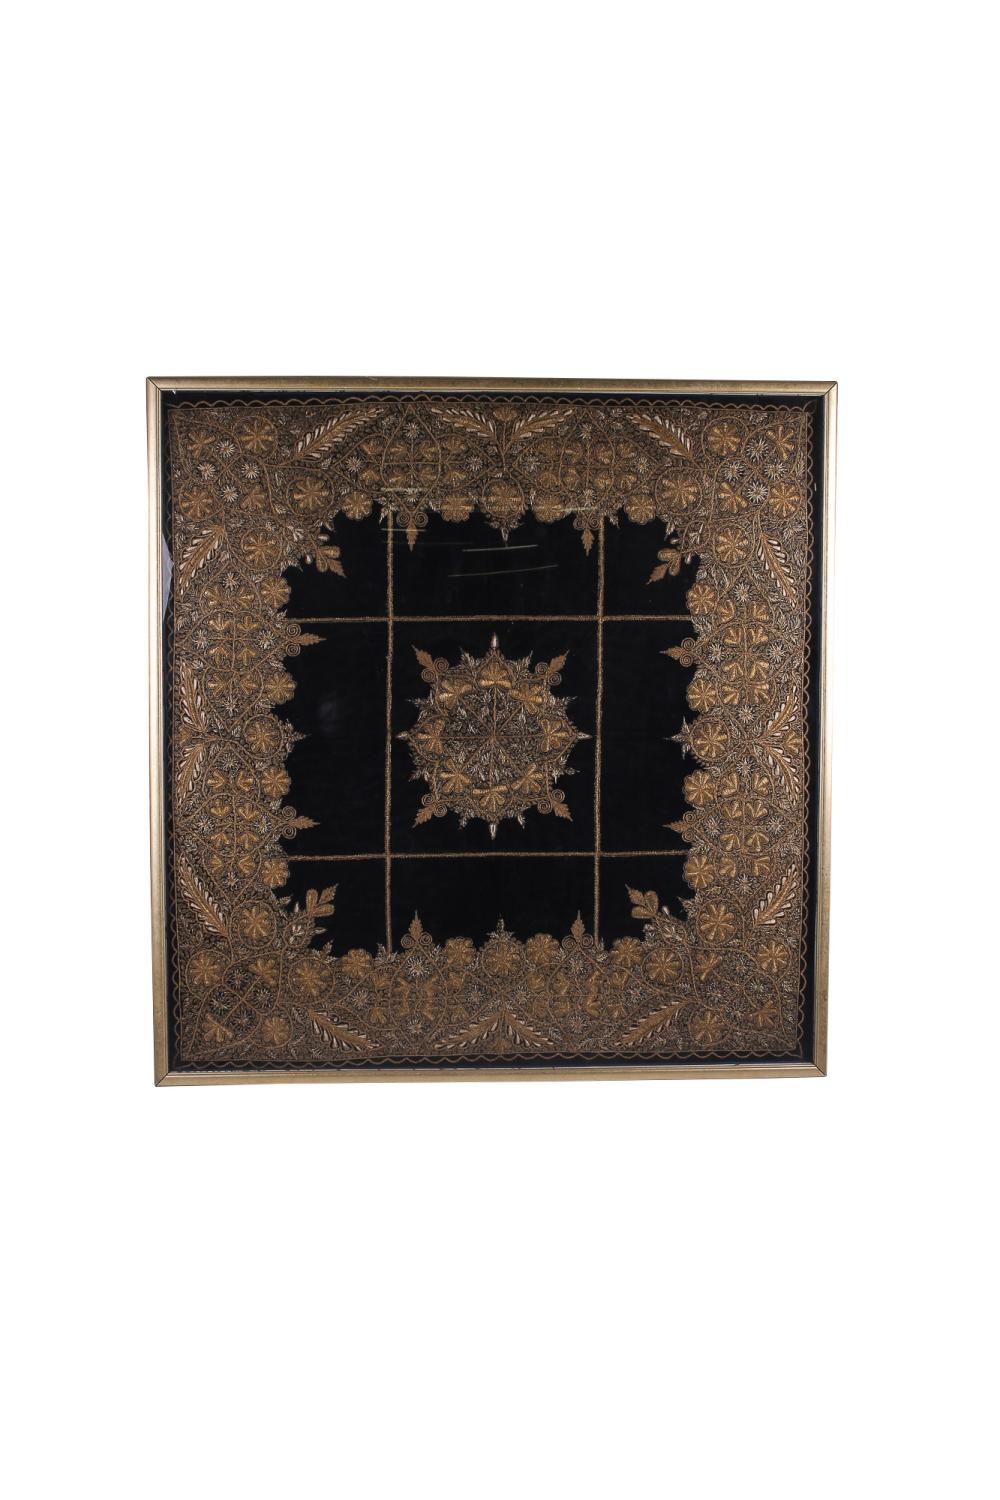 GOLD THREADED TAPESTRYmounted in frame,